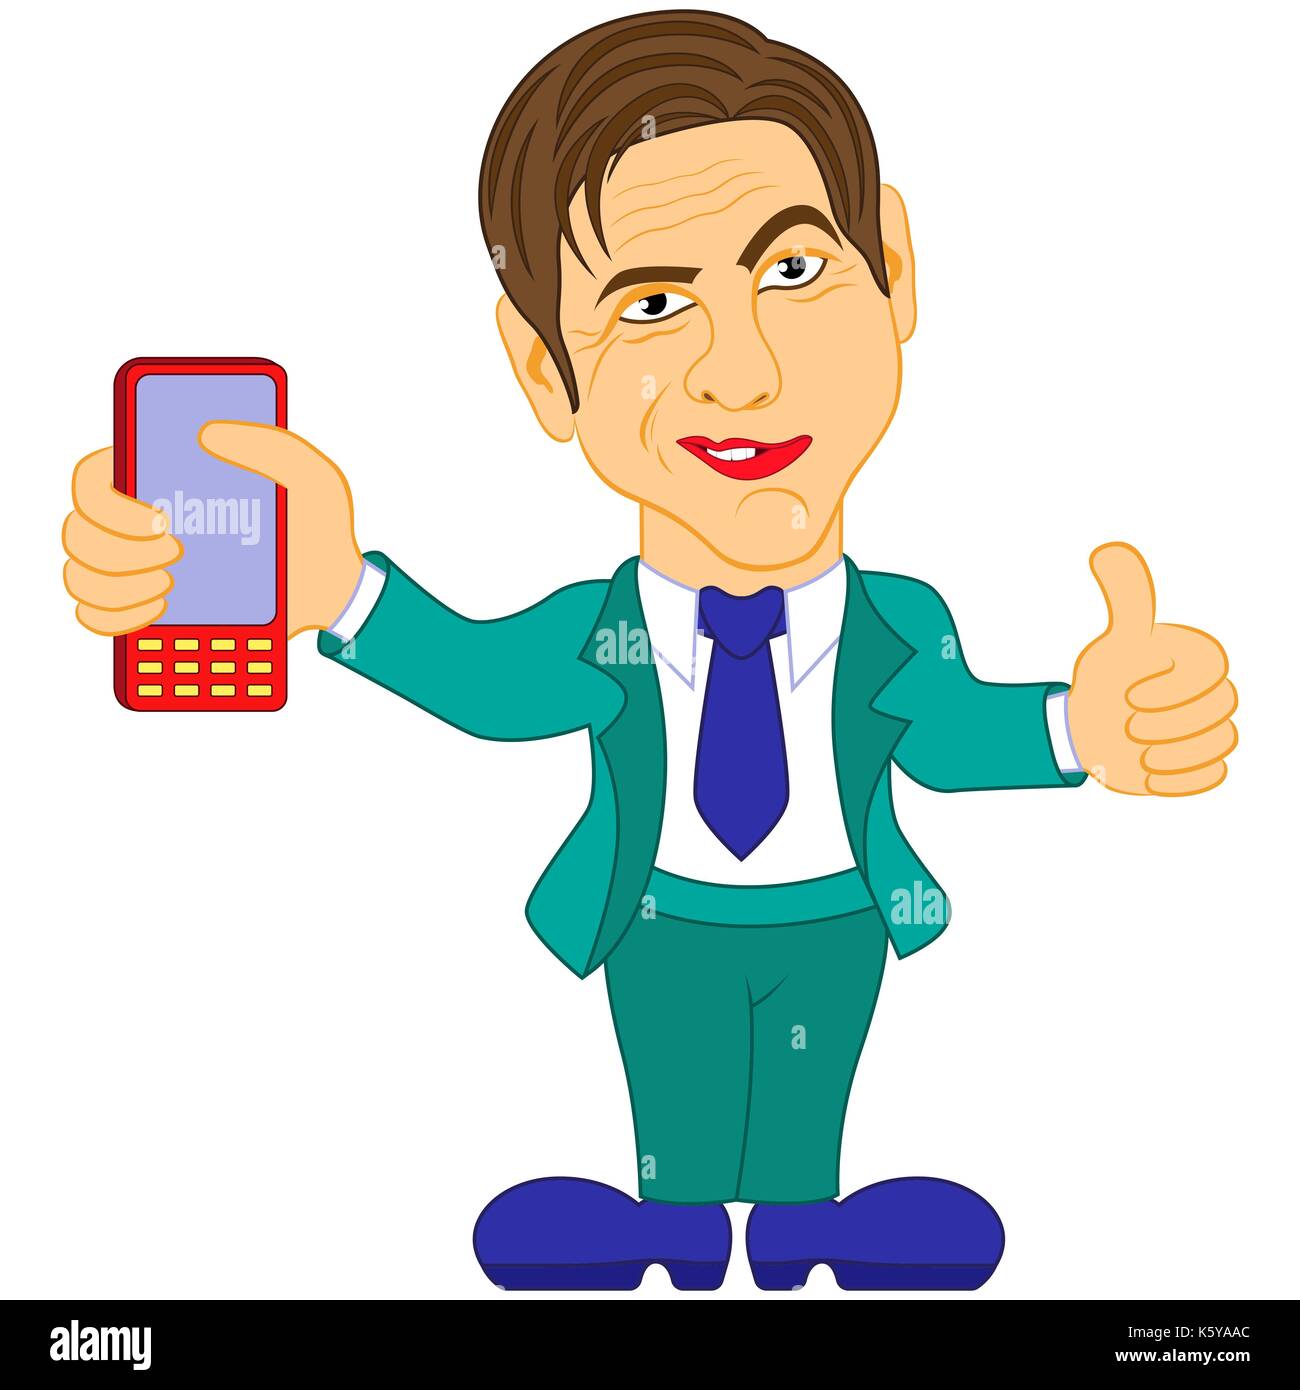 Smiled gentleman in turquoise suit holds the mobile phone, color cartoon vector illustration Stock Vector